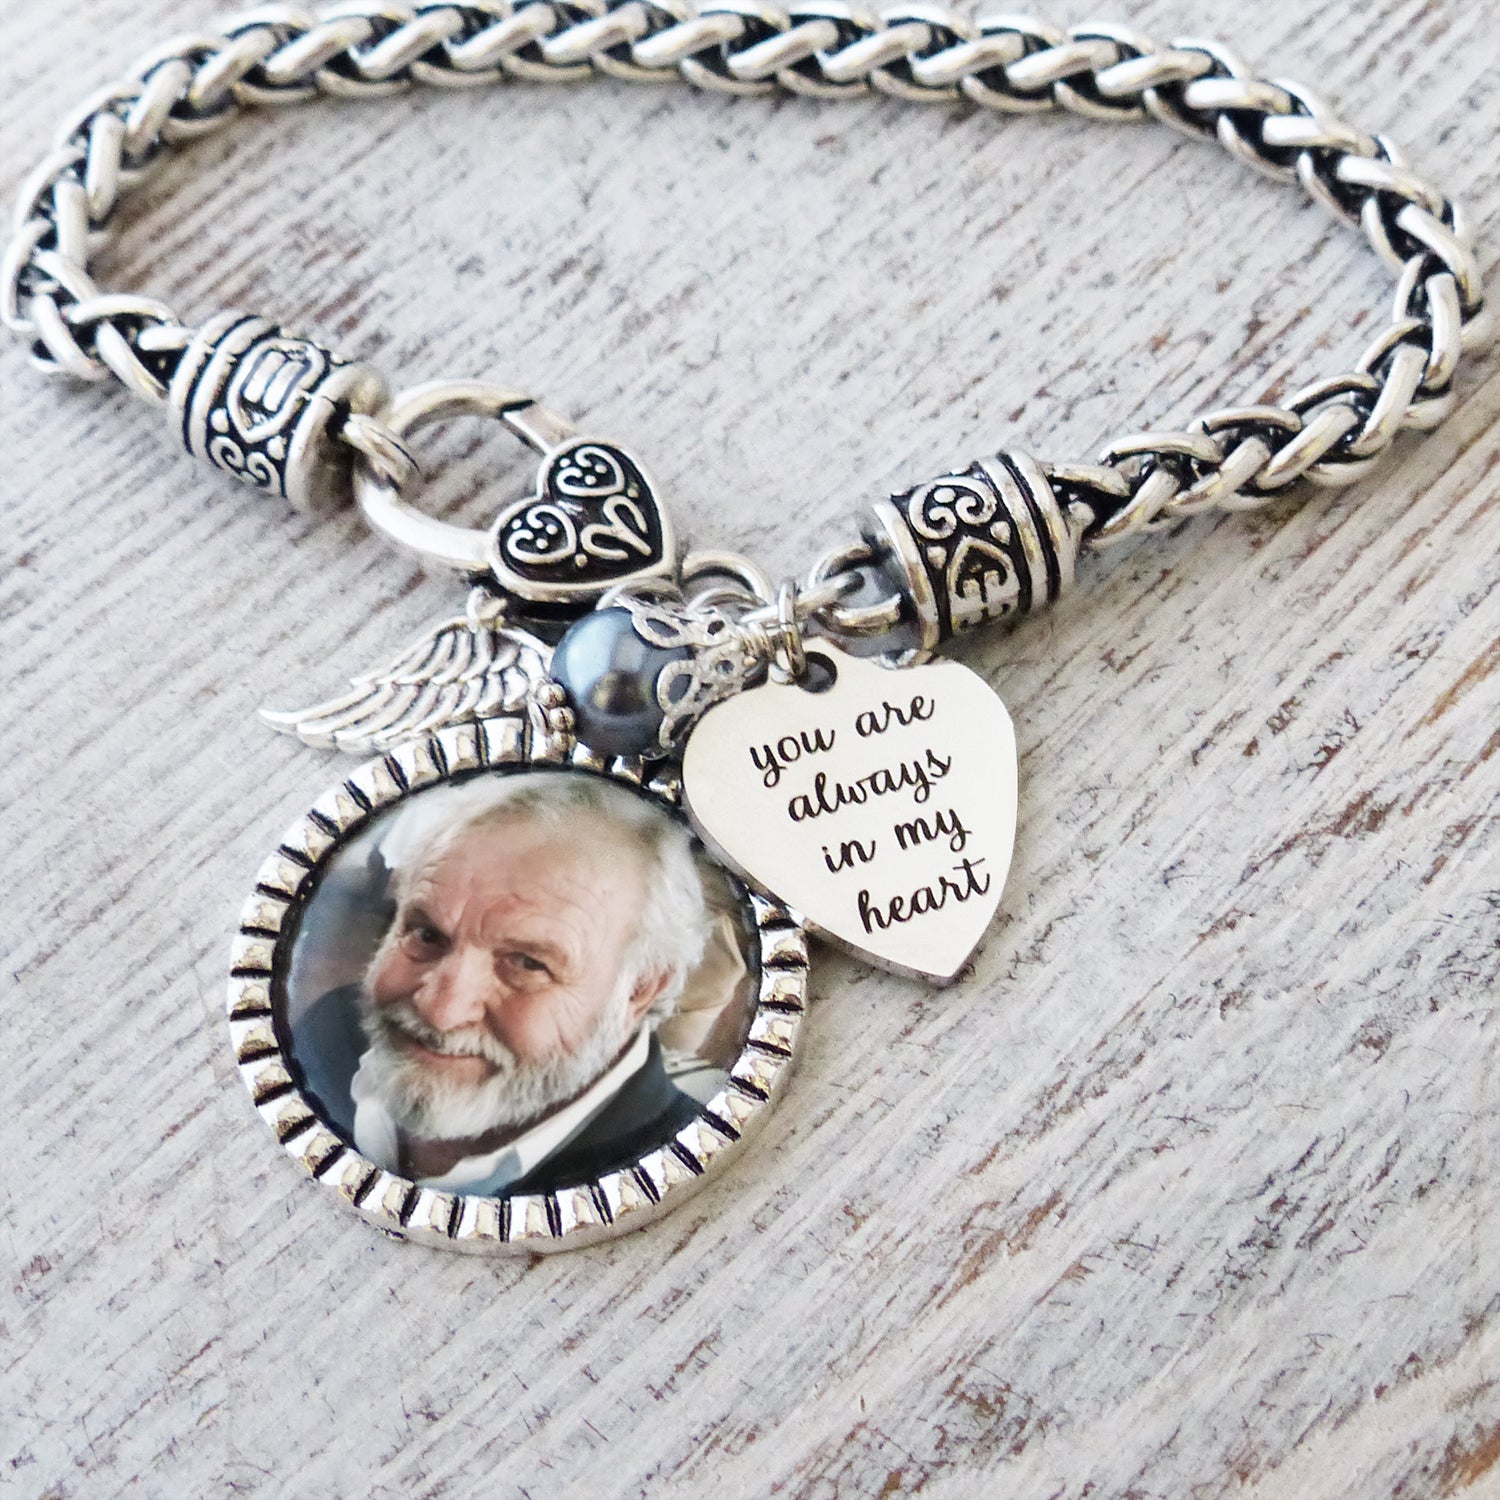 You are always in my heart custom photo memorial bracelet with angel wing charm.